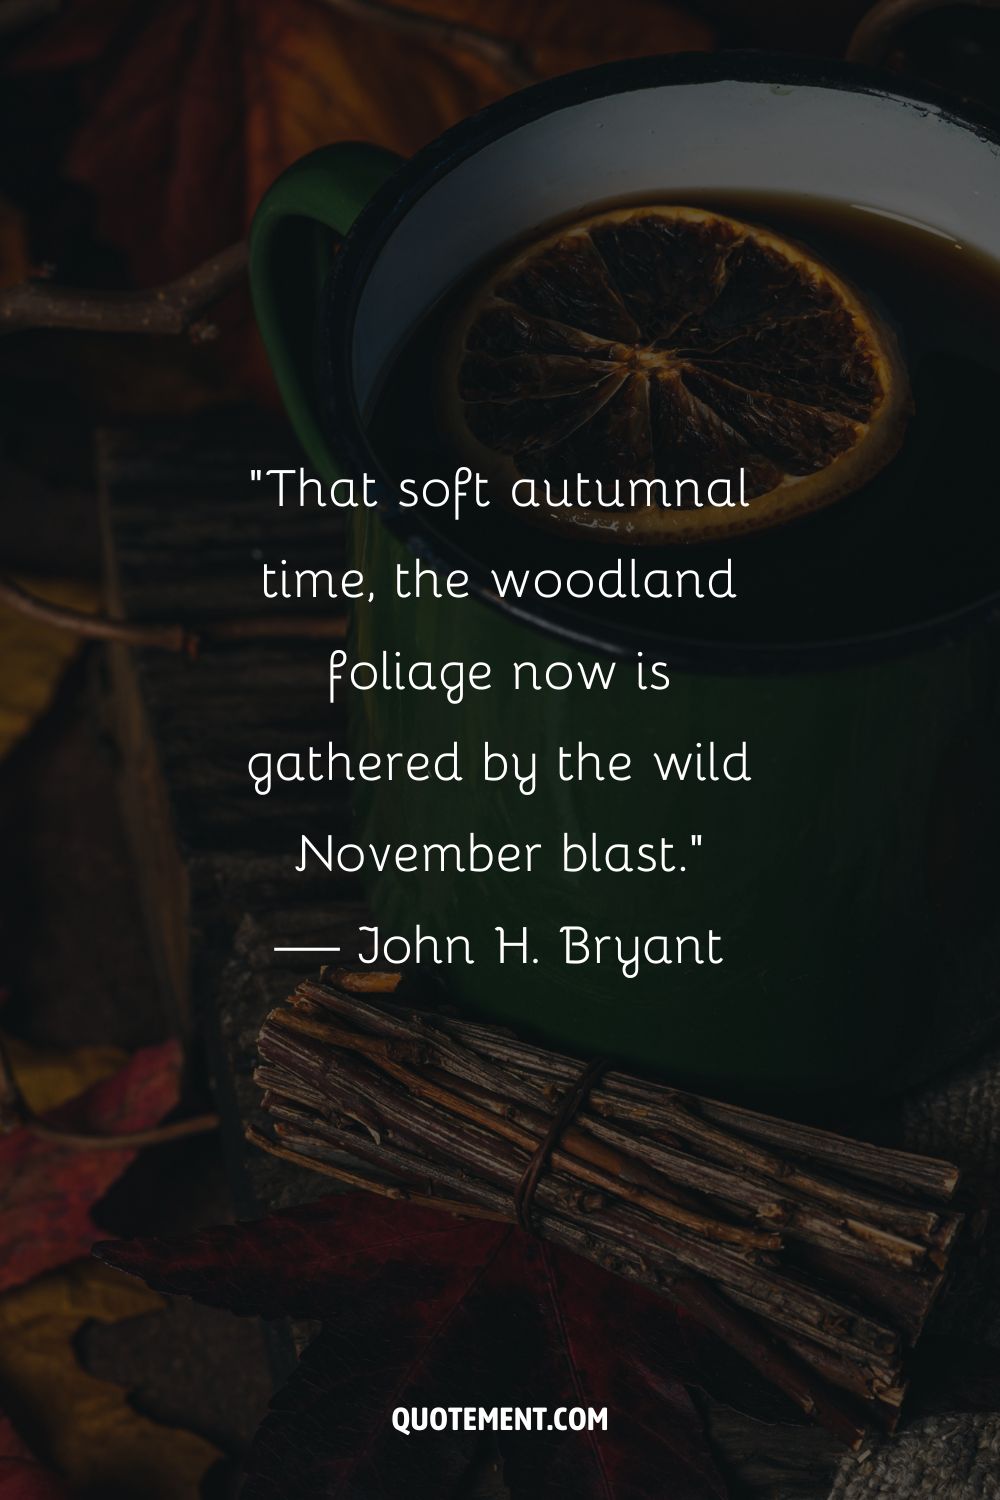 Image of a tea cup representing one of the best November quotes.
